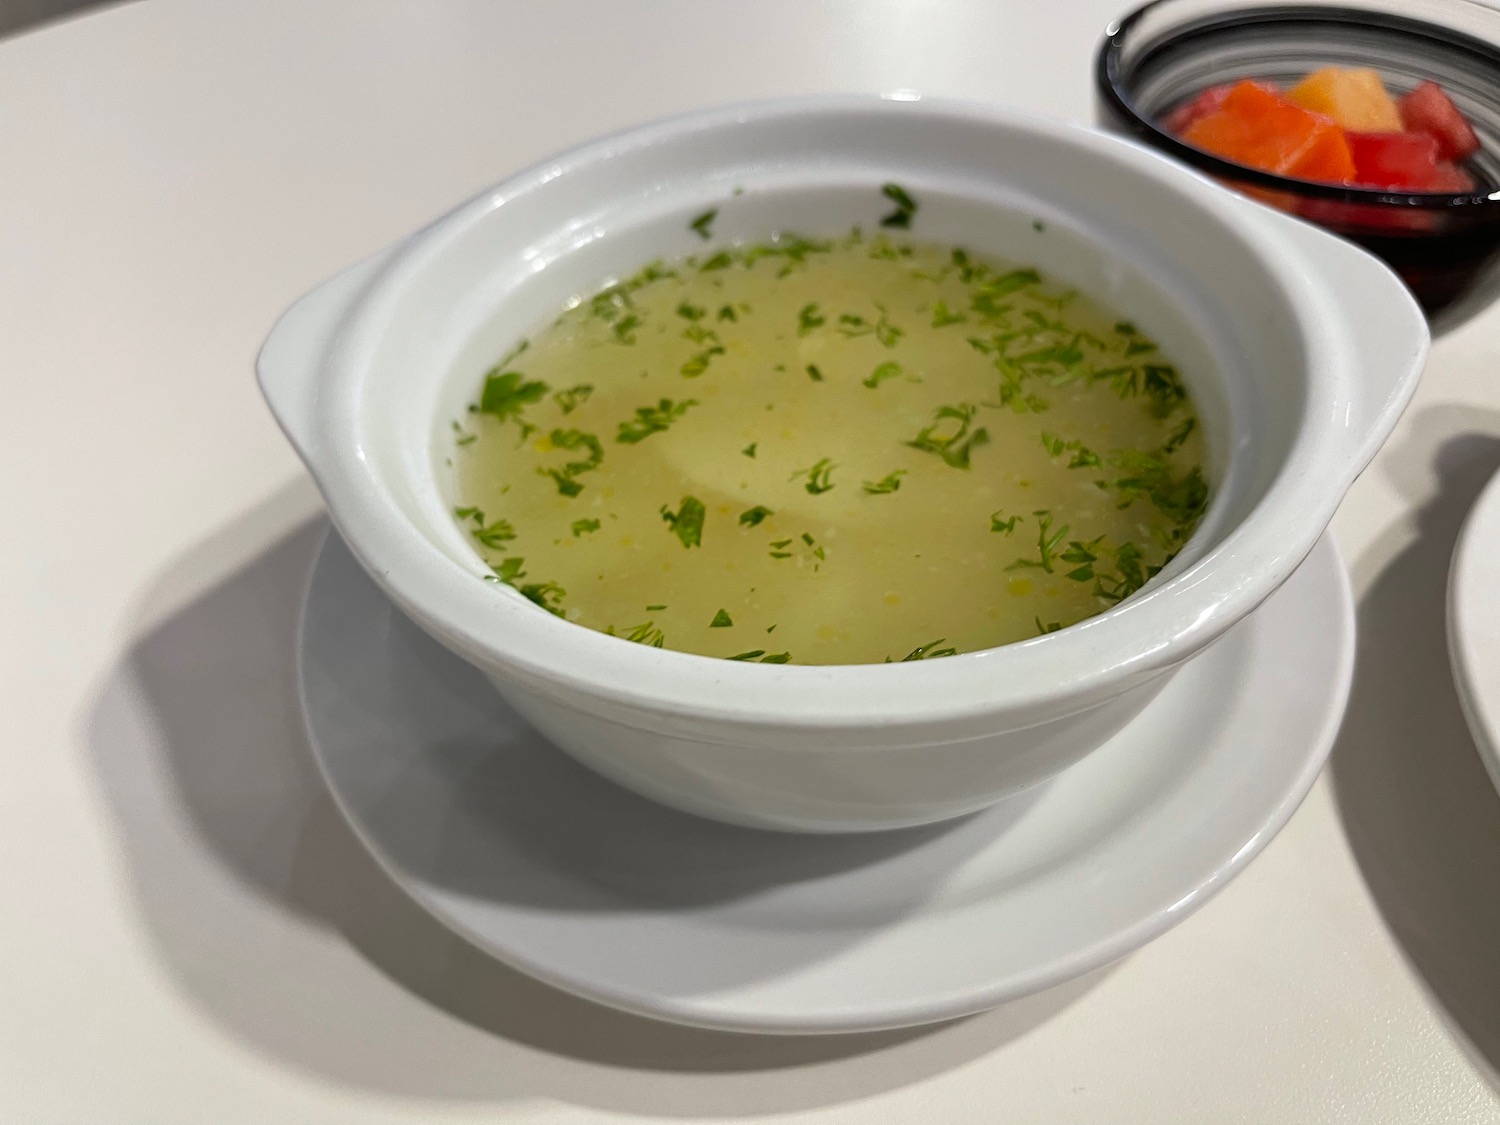 a bowl of soup with parsley on a white plate